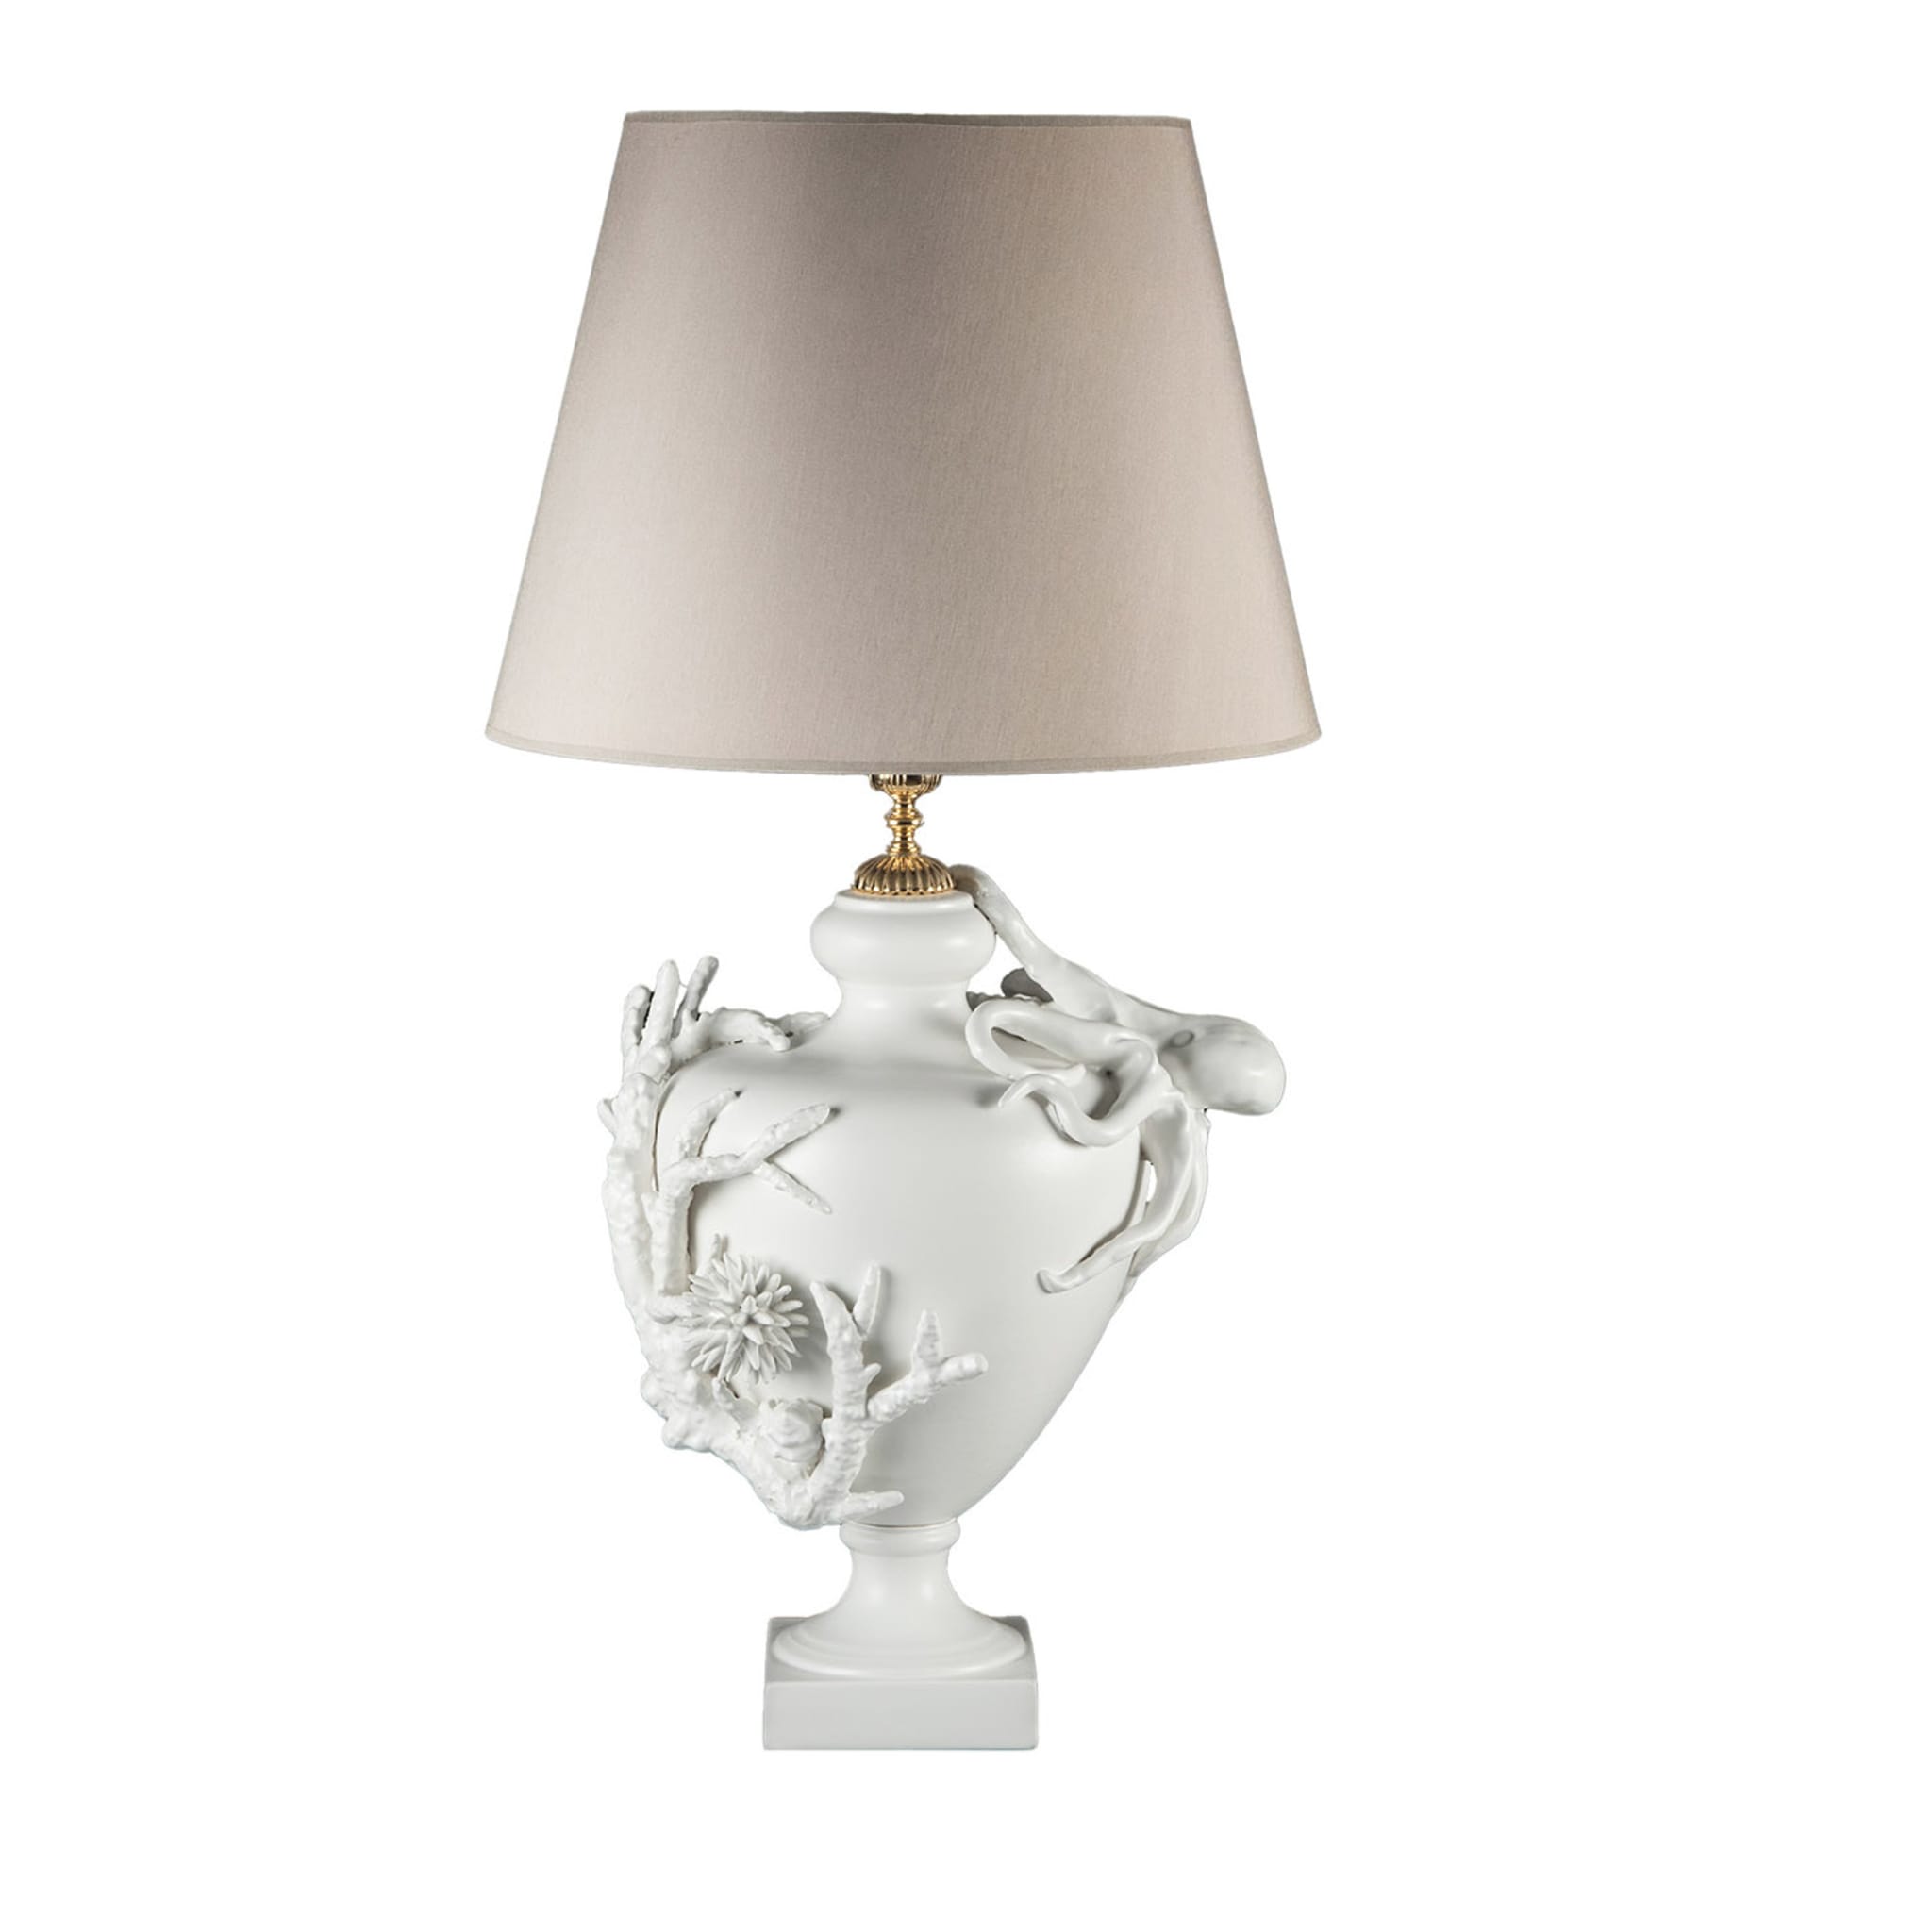 Abissi White Table Lamp by Antonio Fullin - Main view